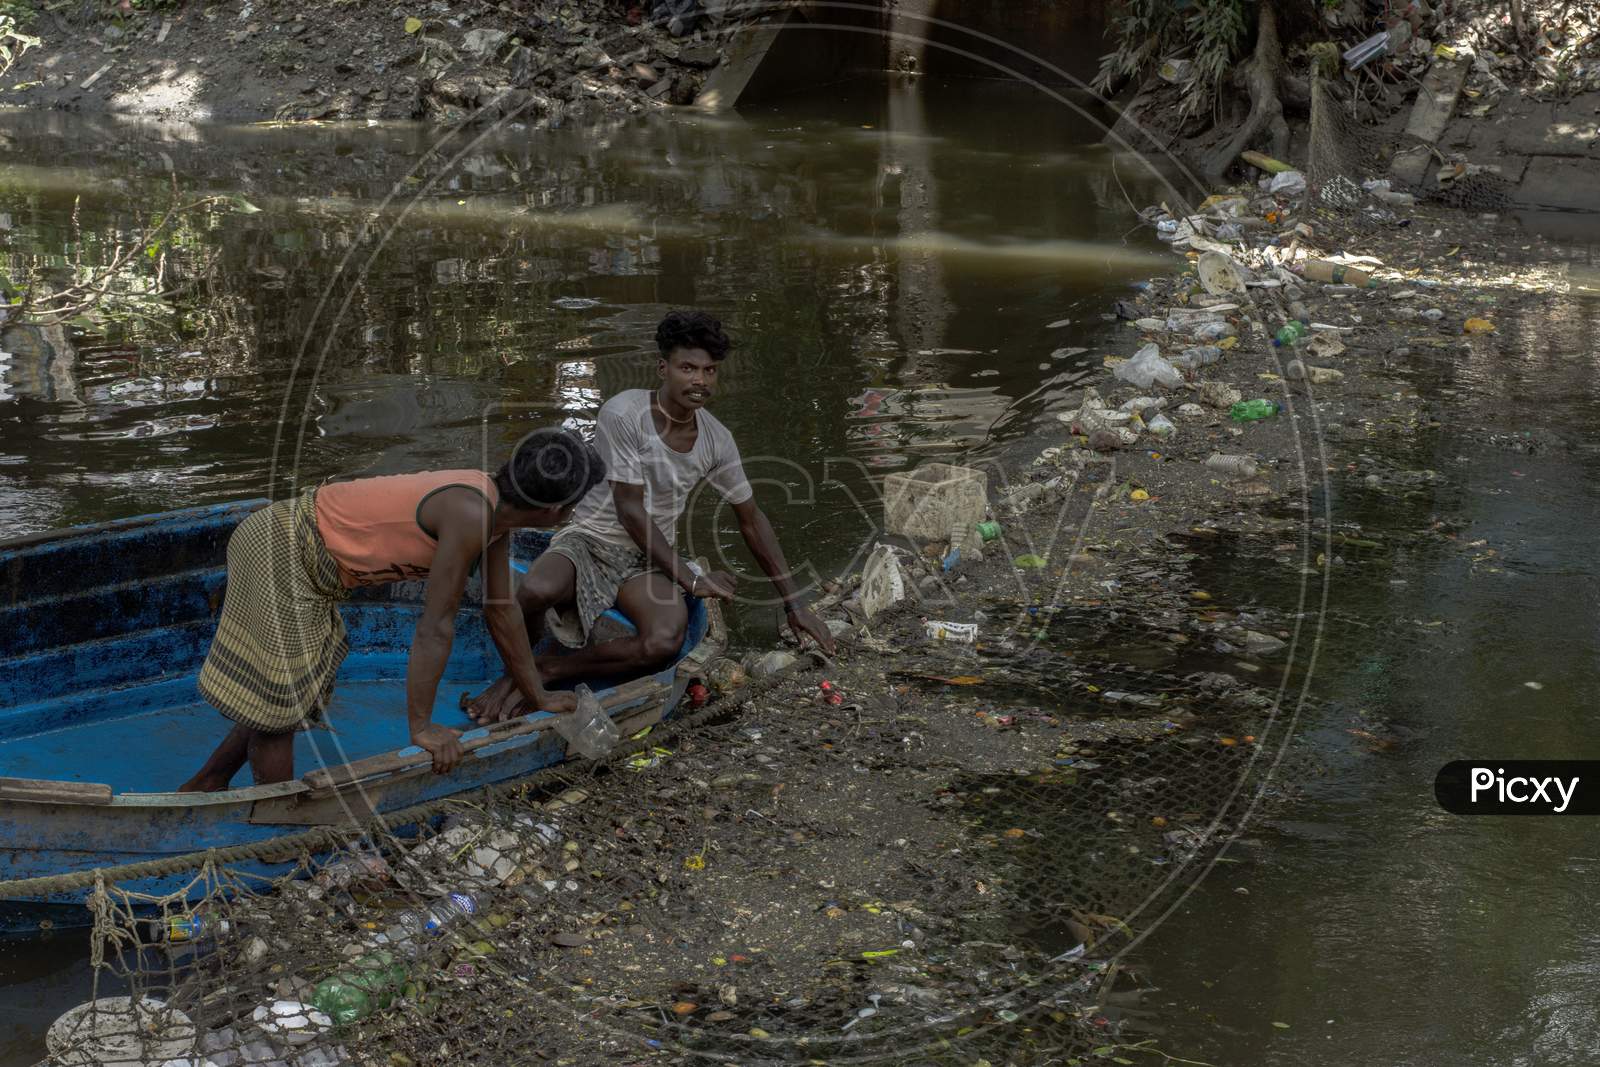 15Th August, 2021, Kolkata, West Bengal, India: 15Th August, 2021, Kolkata, West Bengal, India: Two Persons On Boat Trying To Clean Canal By Removing Garbage With His Bare Hand In Kolkata, India.